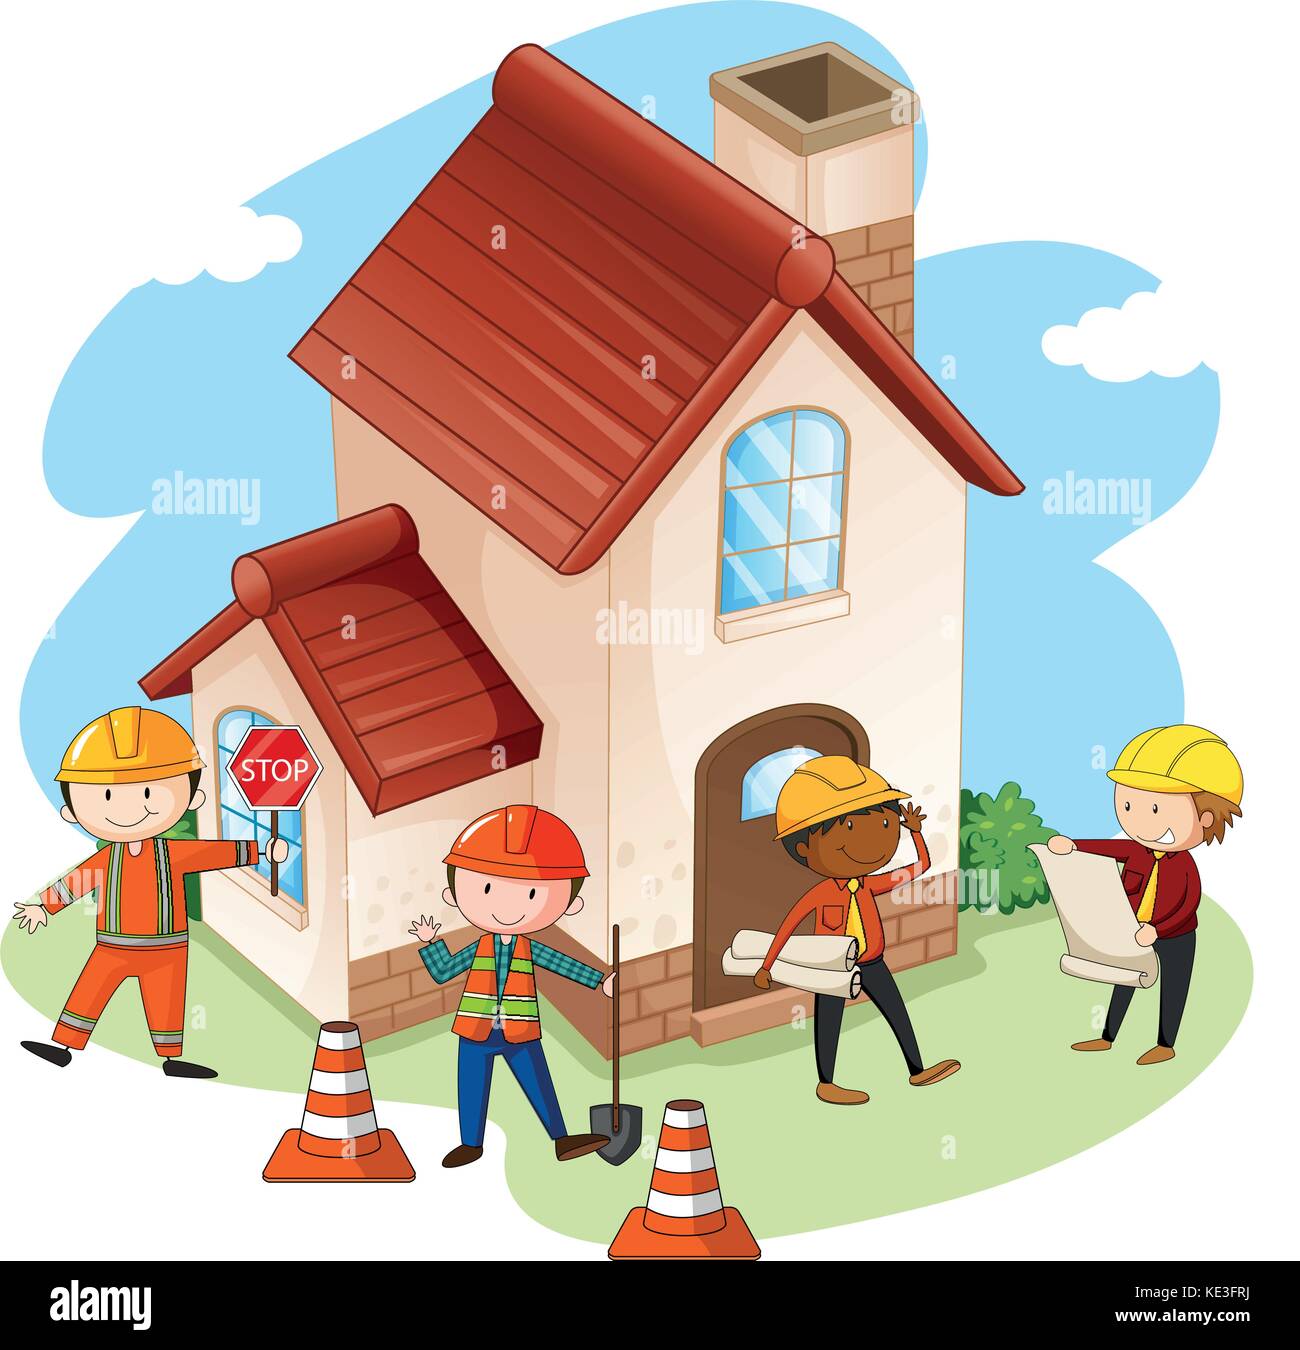 Construction workers building house illustration Stock Vector